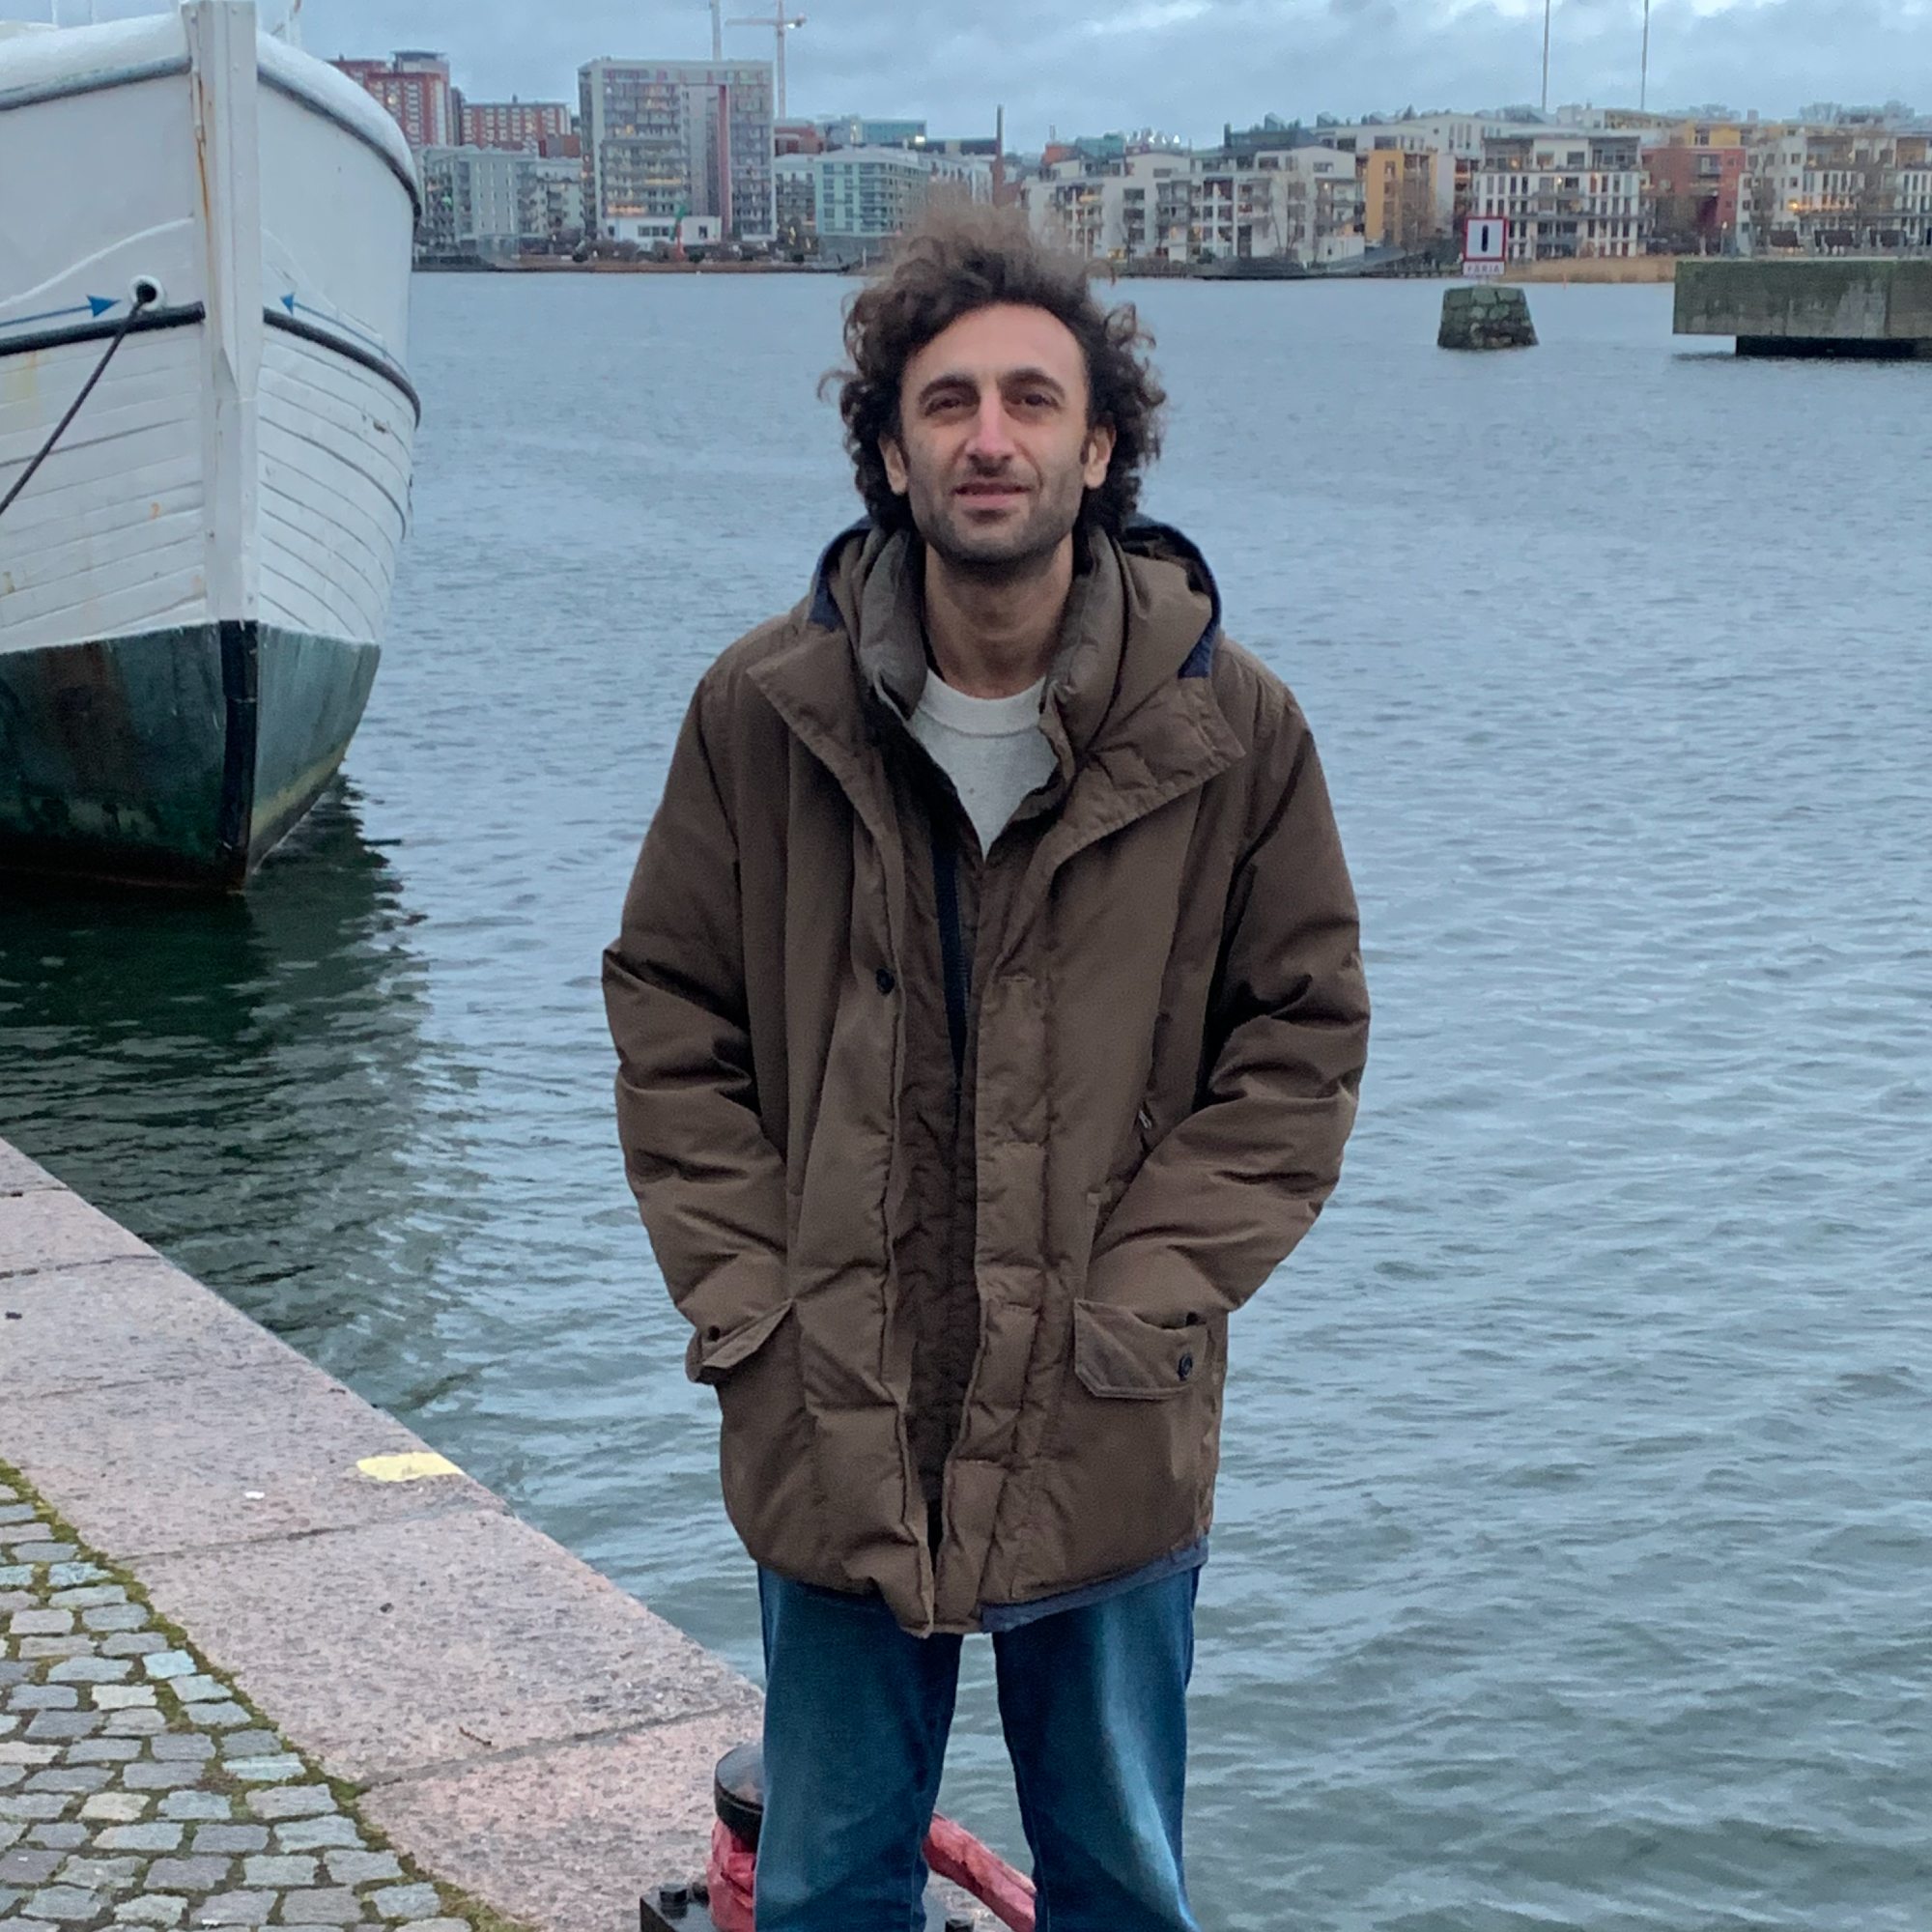 Formerly Policy & Communications Officer for The Fisheries Secretariat in Stockholm. Based in Sweden, Christian Coordinates LIFE’s activities in the Baltic and North Seas. Contact: bans@lifeplatform.eu